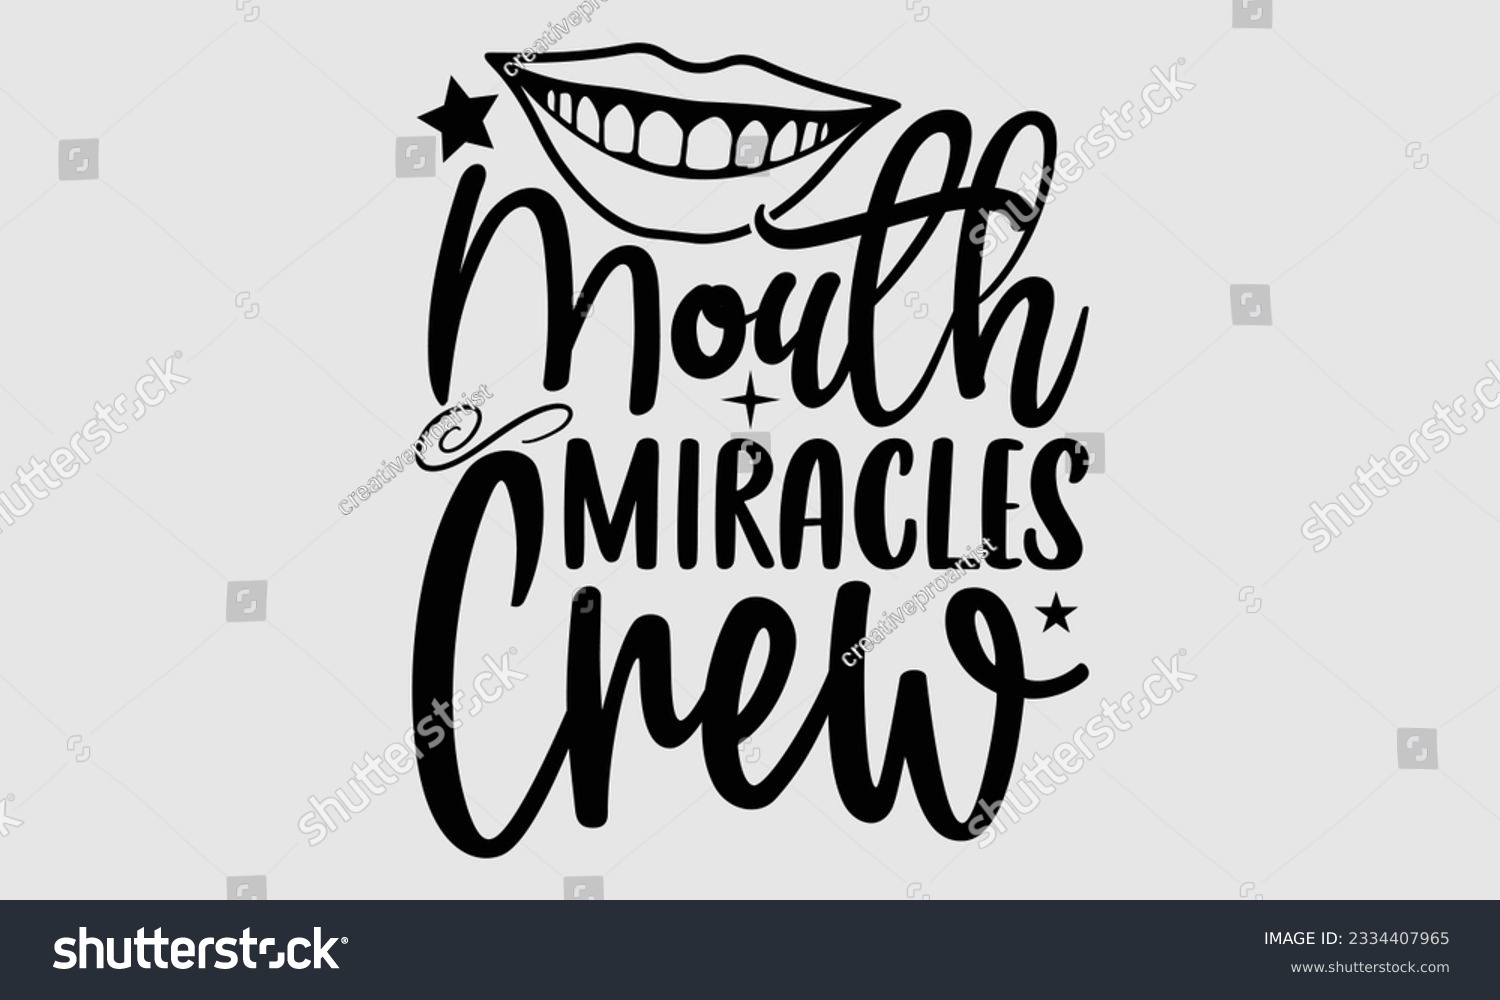 SVG of Mouth Miracles Crew- Dentist t-shirt design, Calligraphy graphic design, eps, svg Files for Cutting, greeting card template with typography text white background. svg